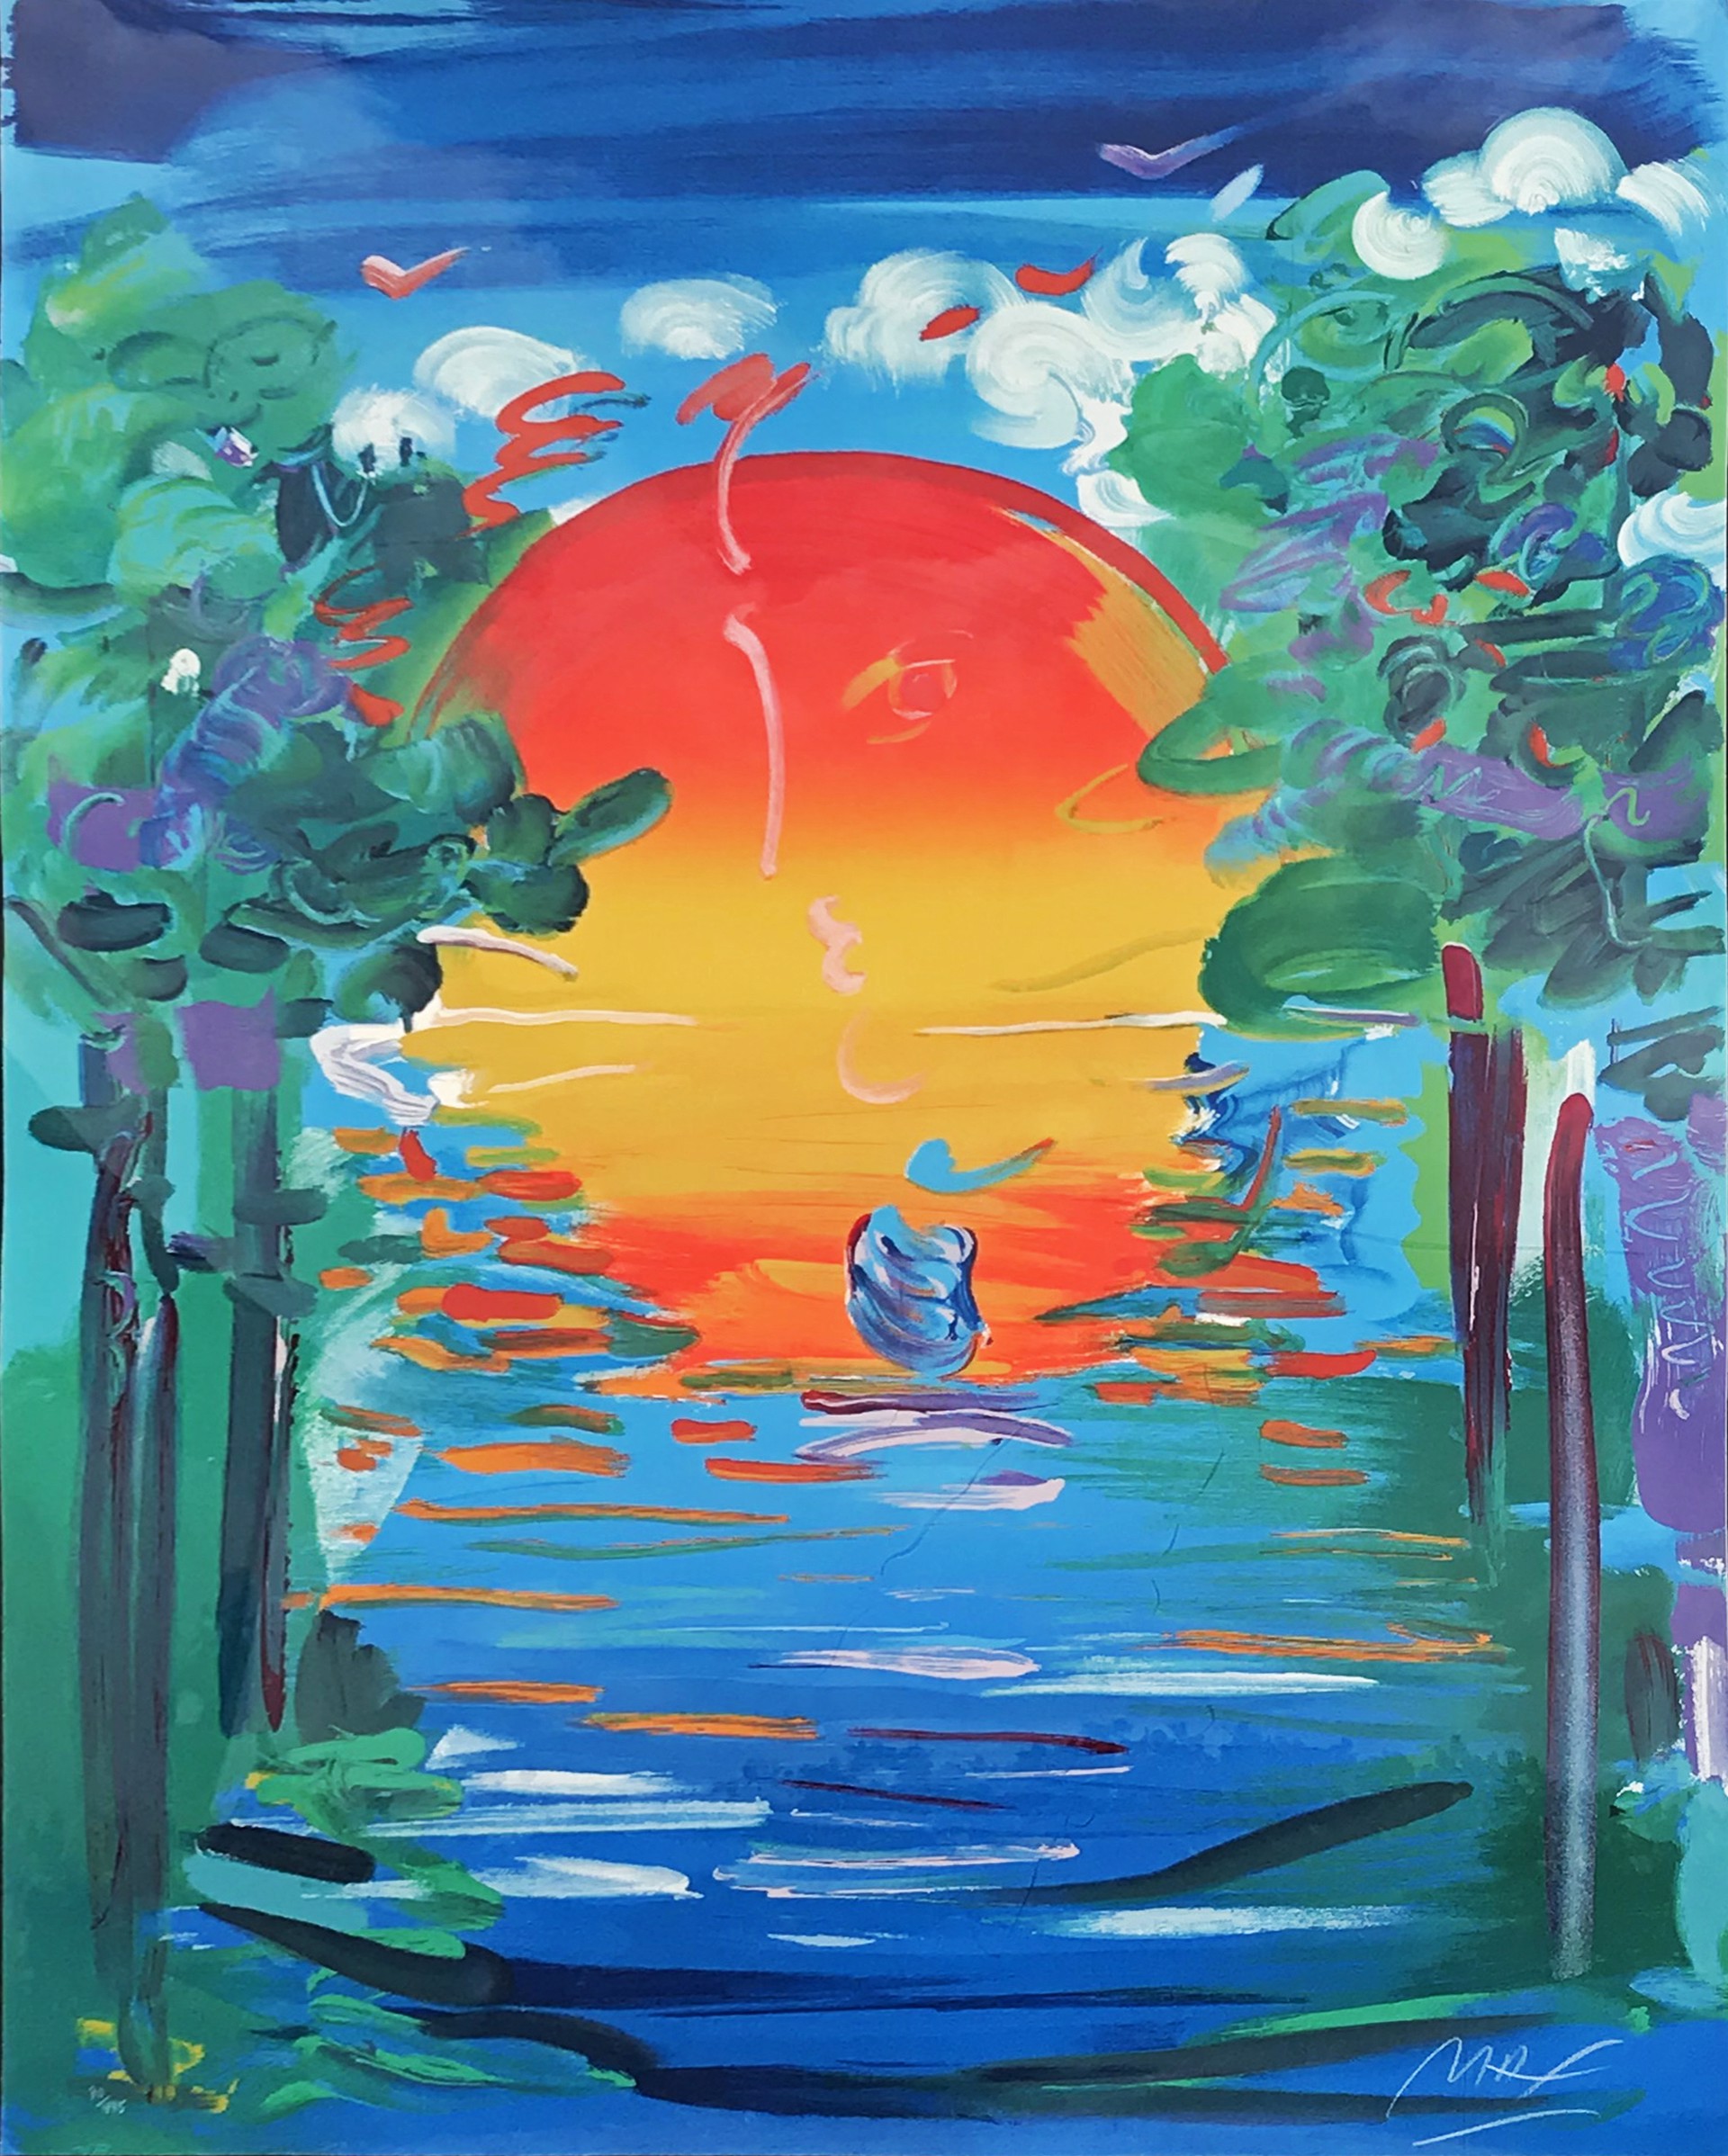 A Better World by Peter Max